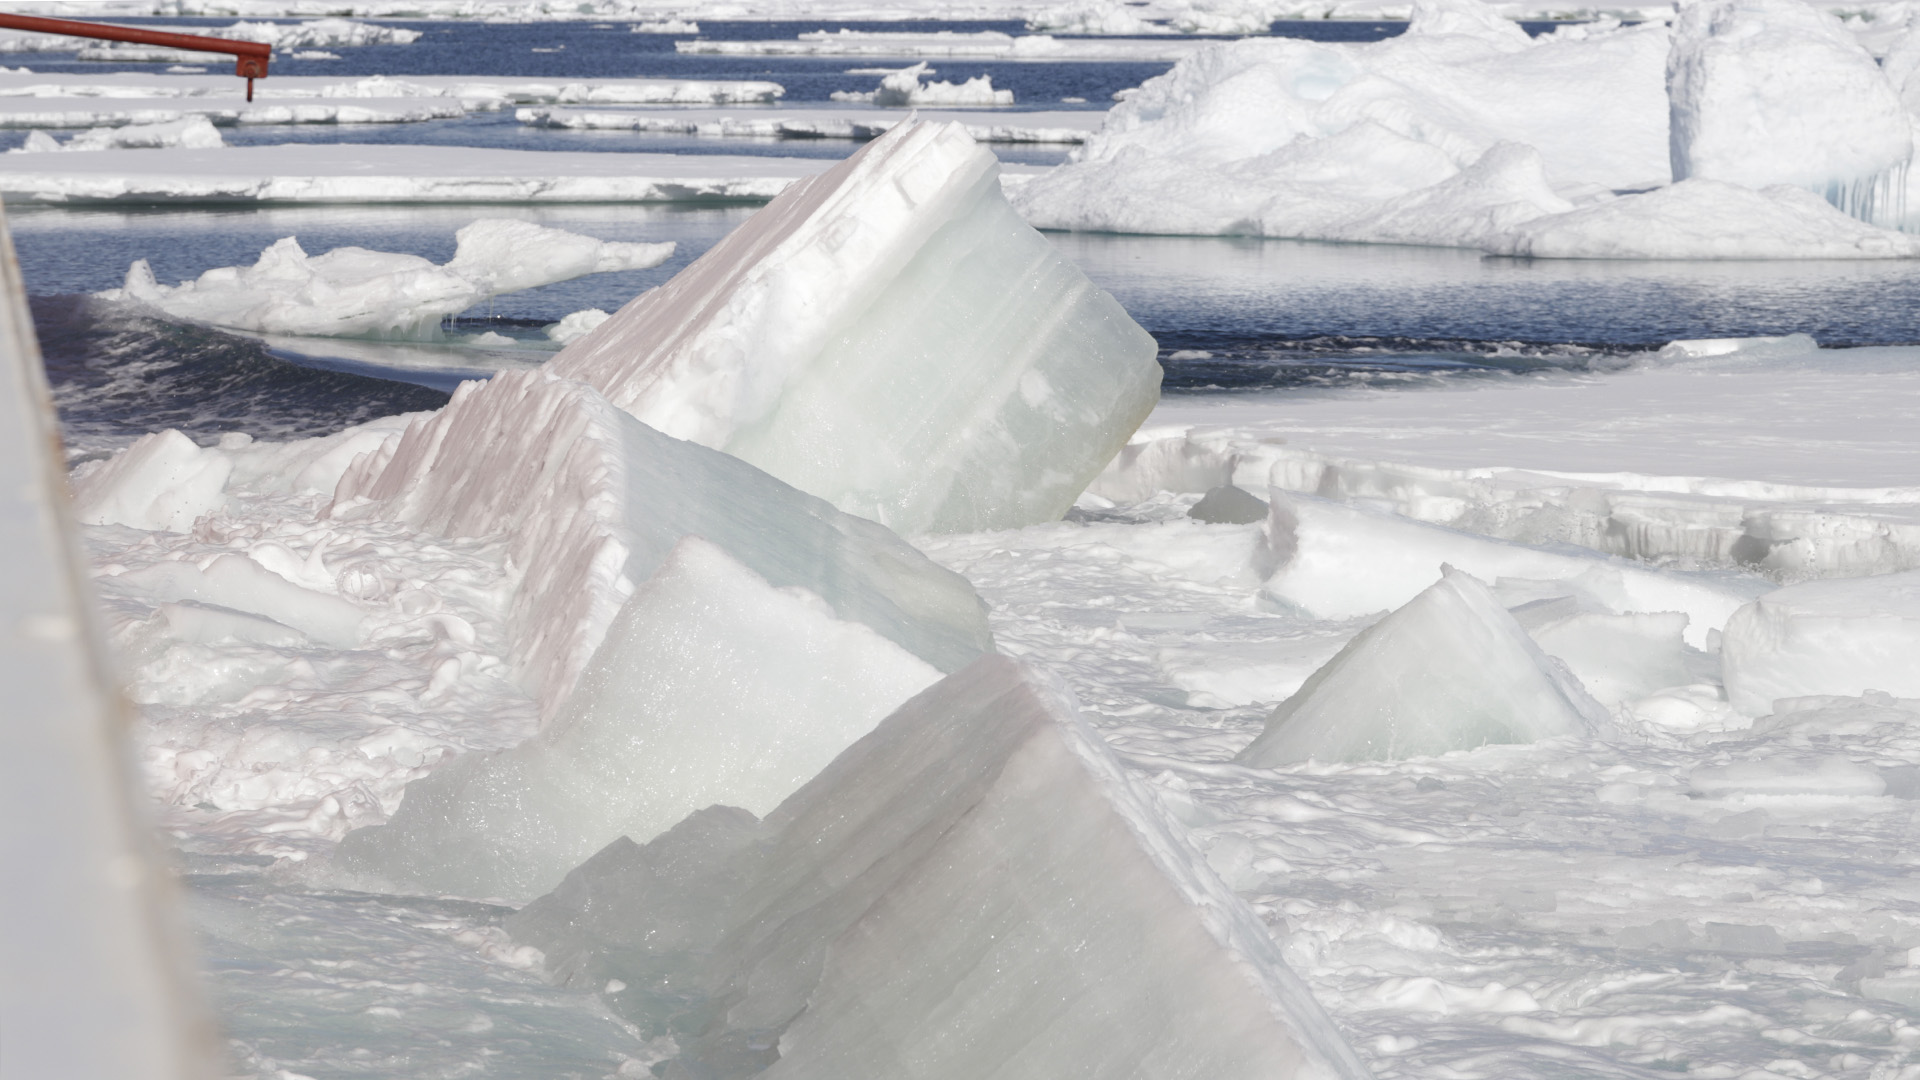 Photo of smaller ice blocks after the IBRV Araon passes